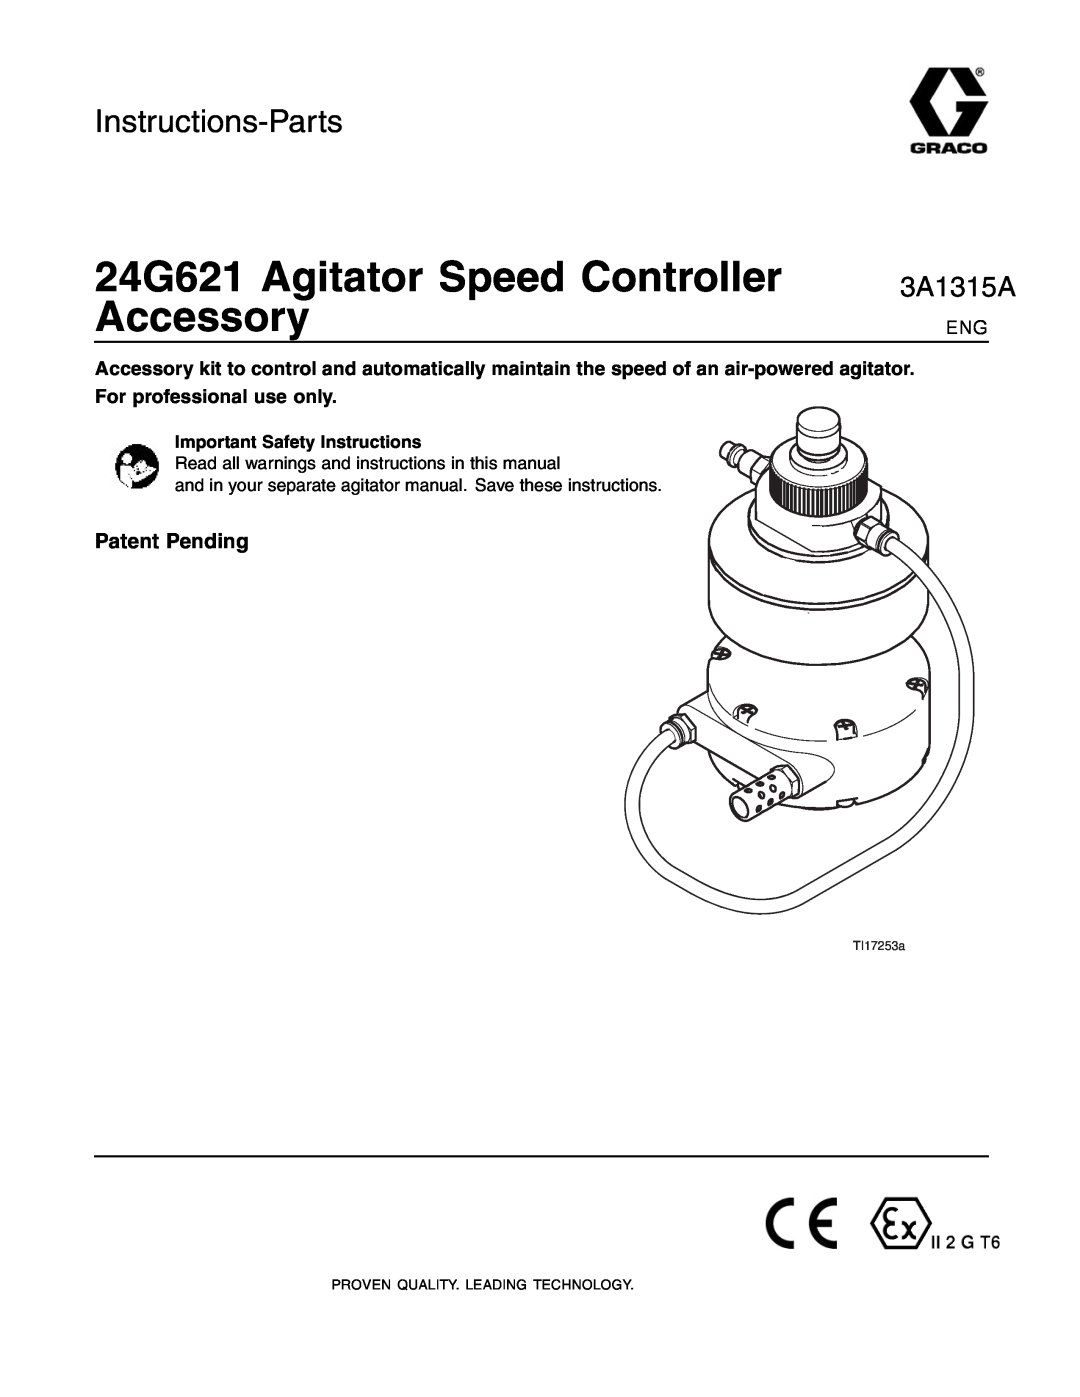 Graco important safety instructions 24G621 Agitator Speed Controller, Accessory, 3A1315A, Instructions-Parts, TI17253a 